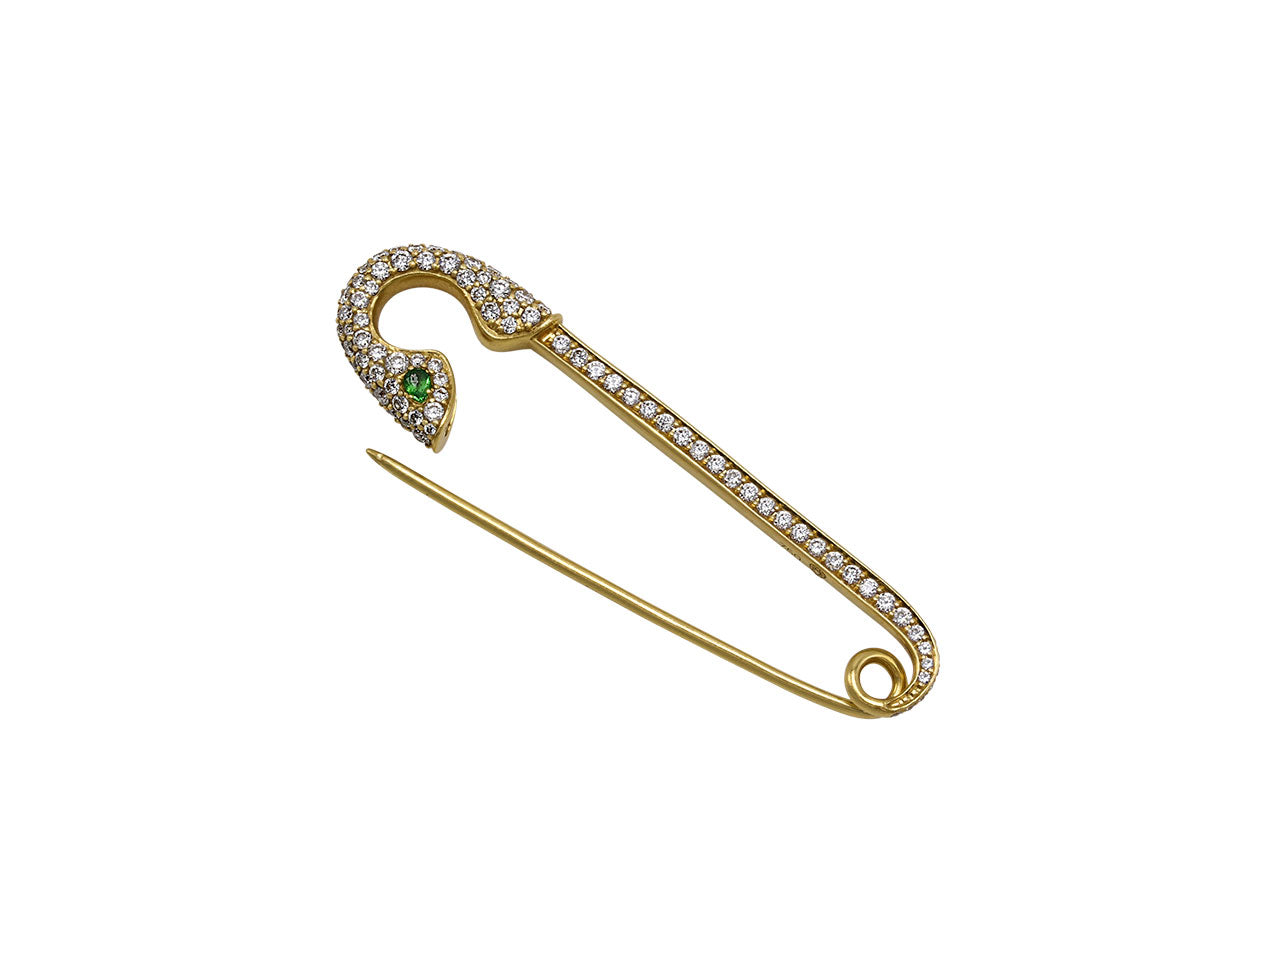 Crow's Nest 'Safety First' Brooch in 18K Gold